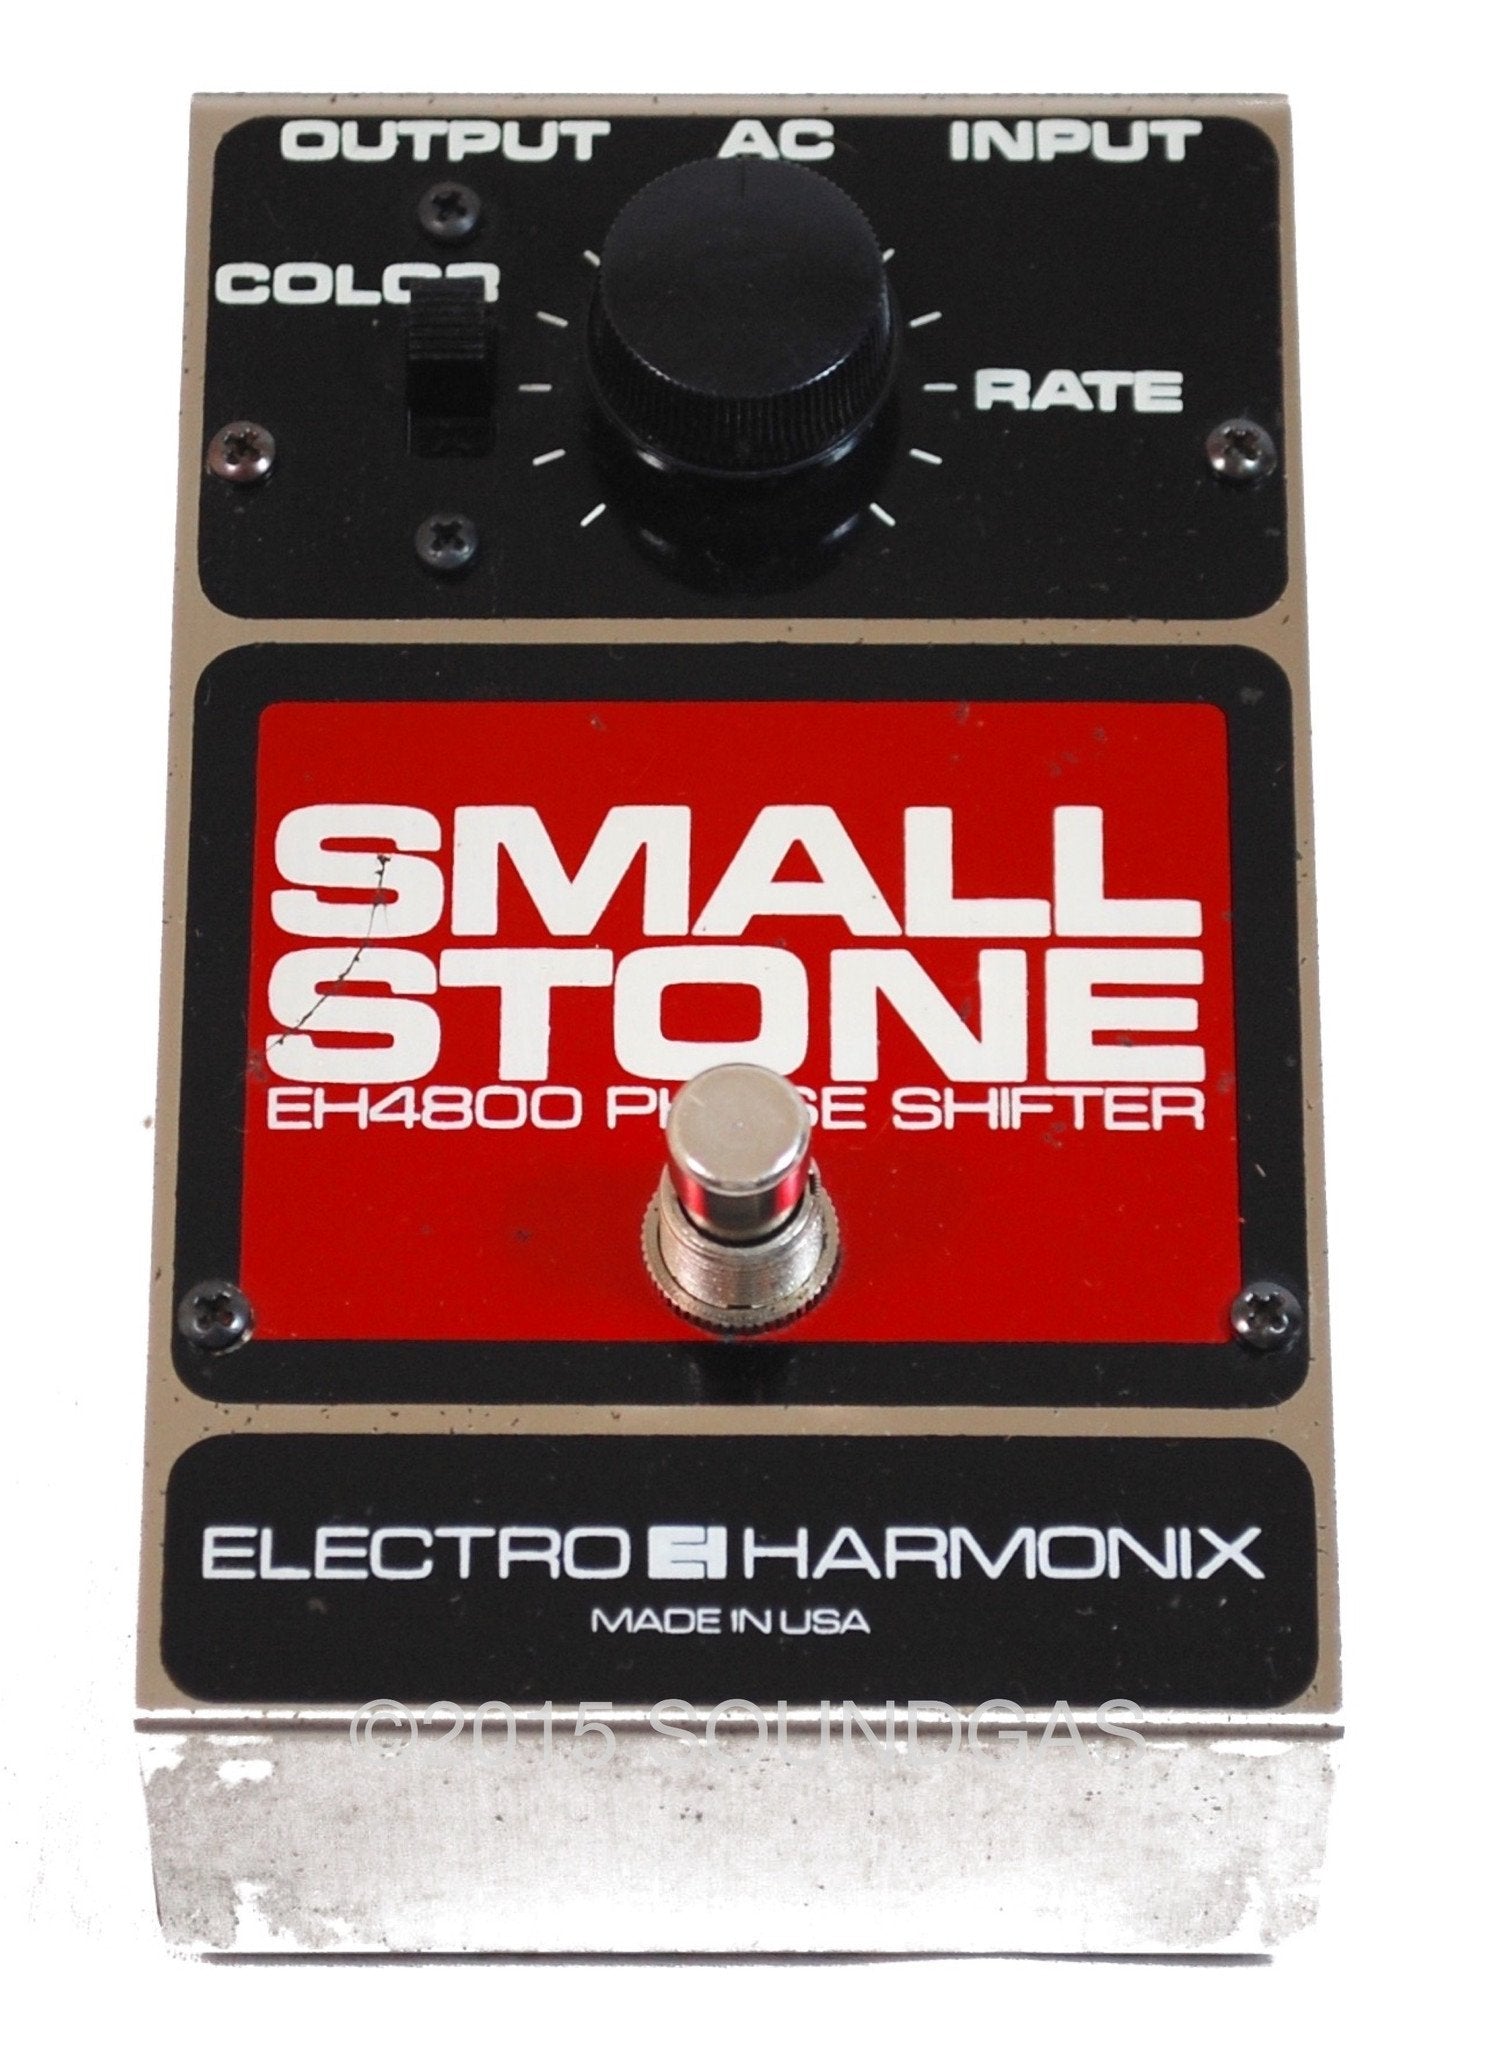 ELECTRO-HARMONIX SMALL STONE V3 PHASE SHIFTER FOR SALE – Soundgas